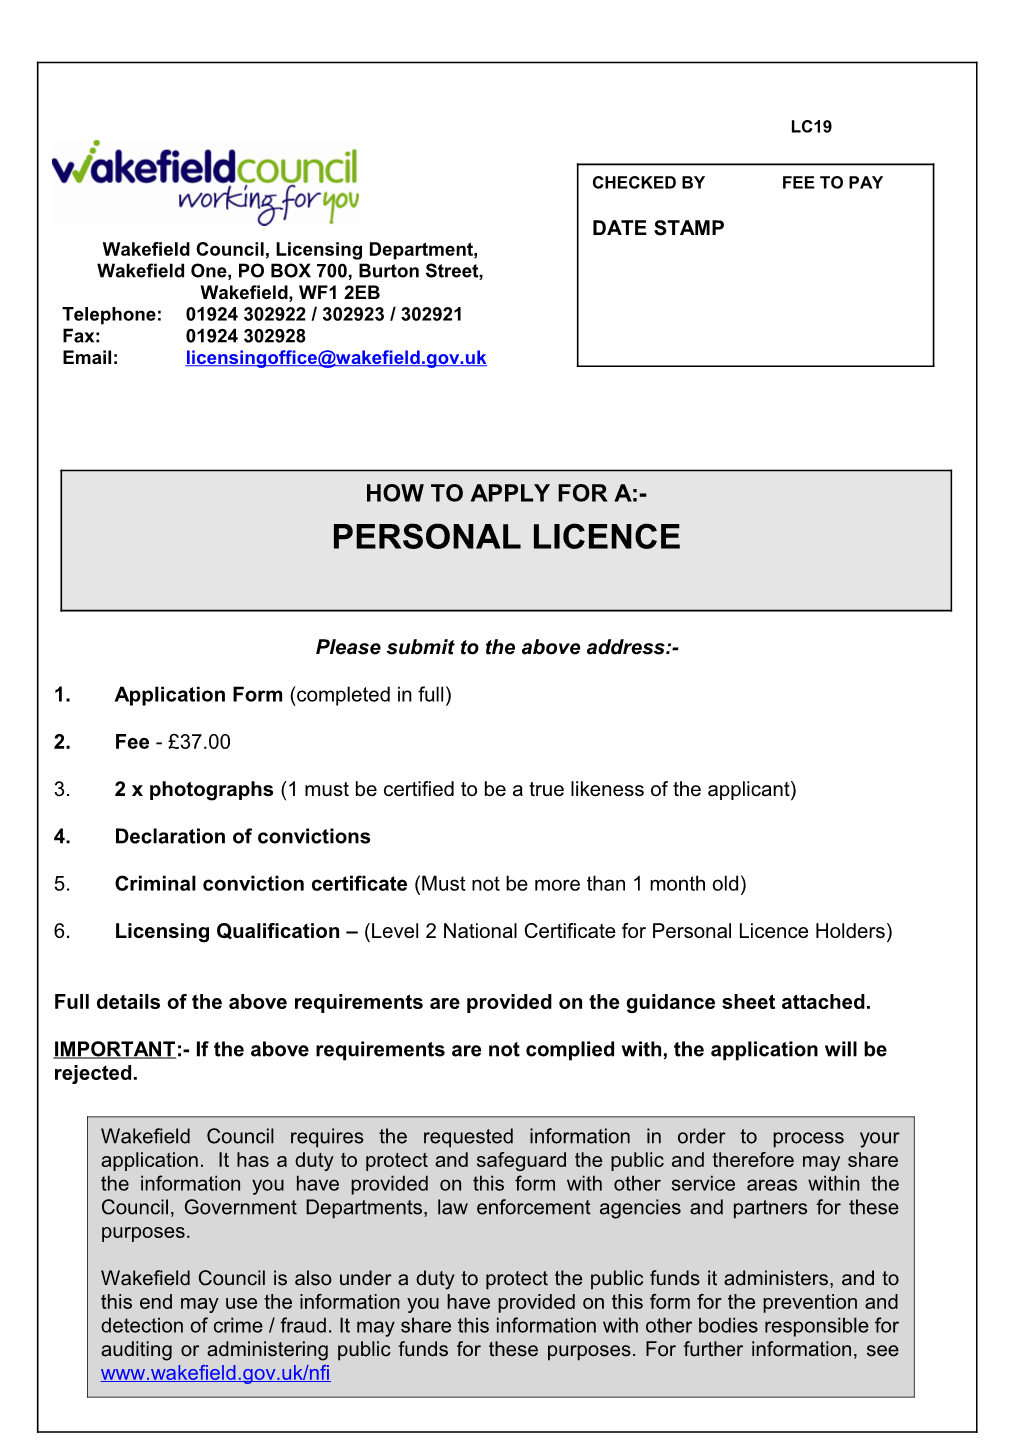 Application for a Personal Licence